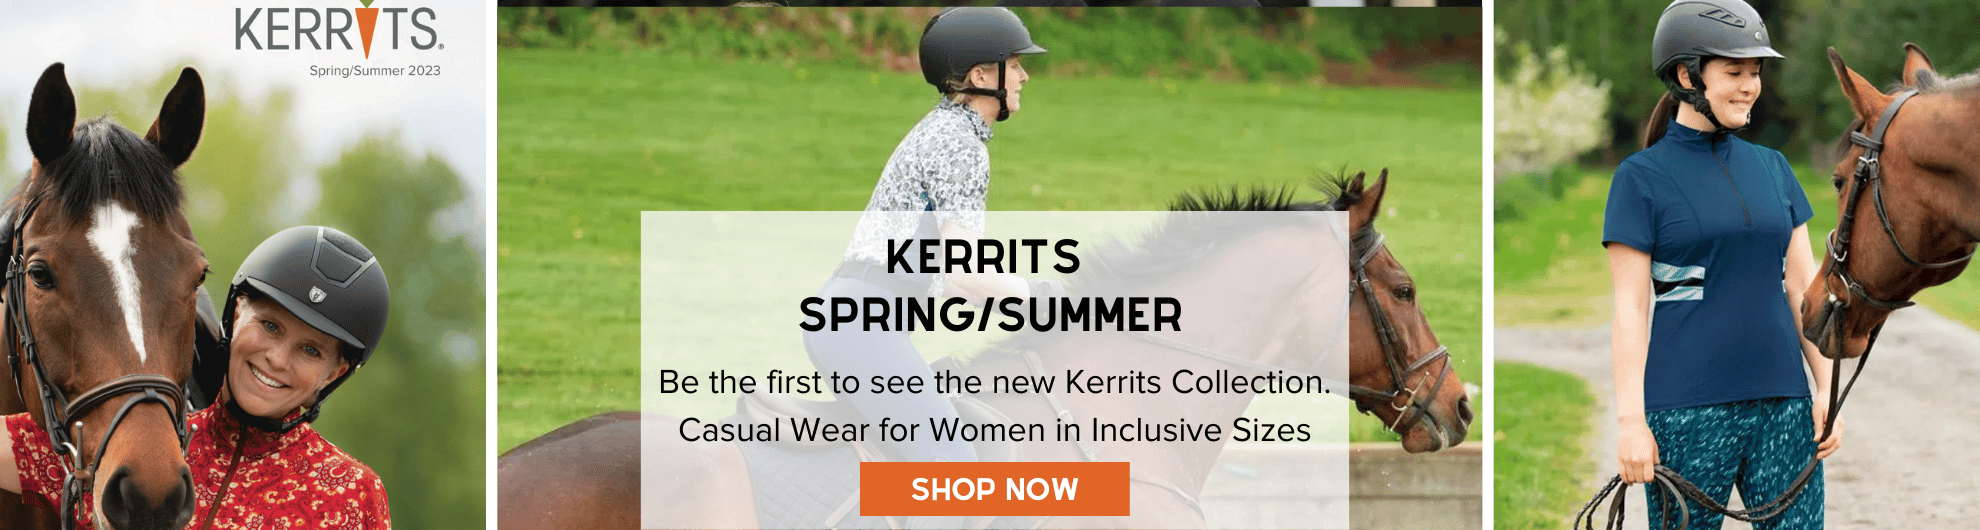 Shop for the New Kerrits Spring/Summer Line